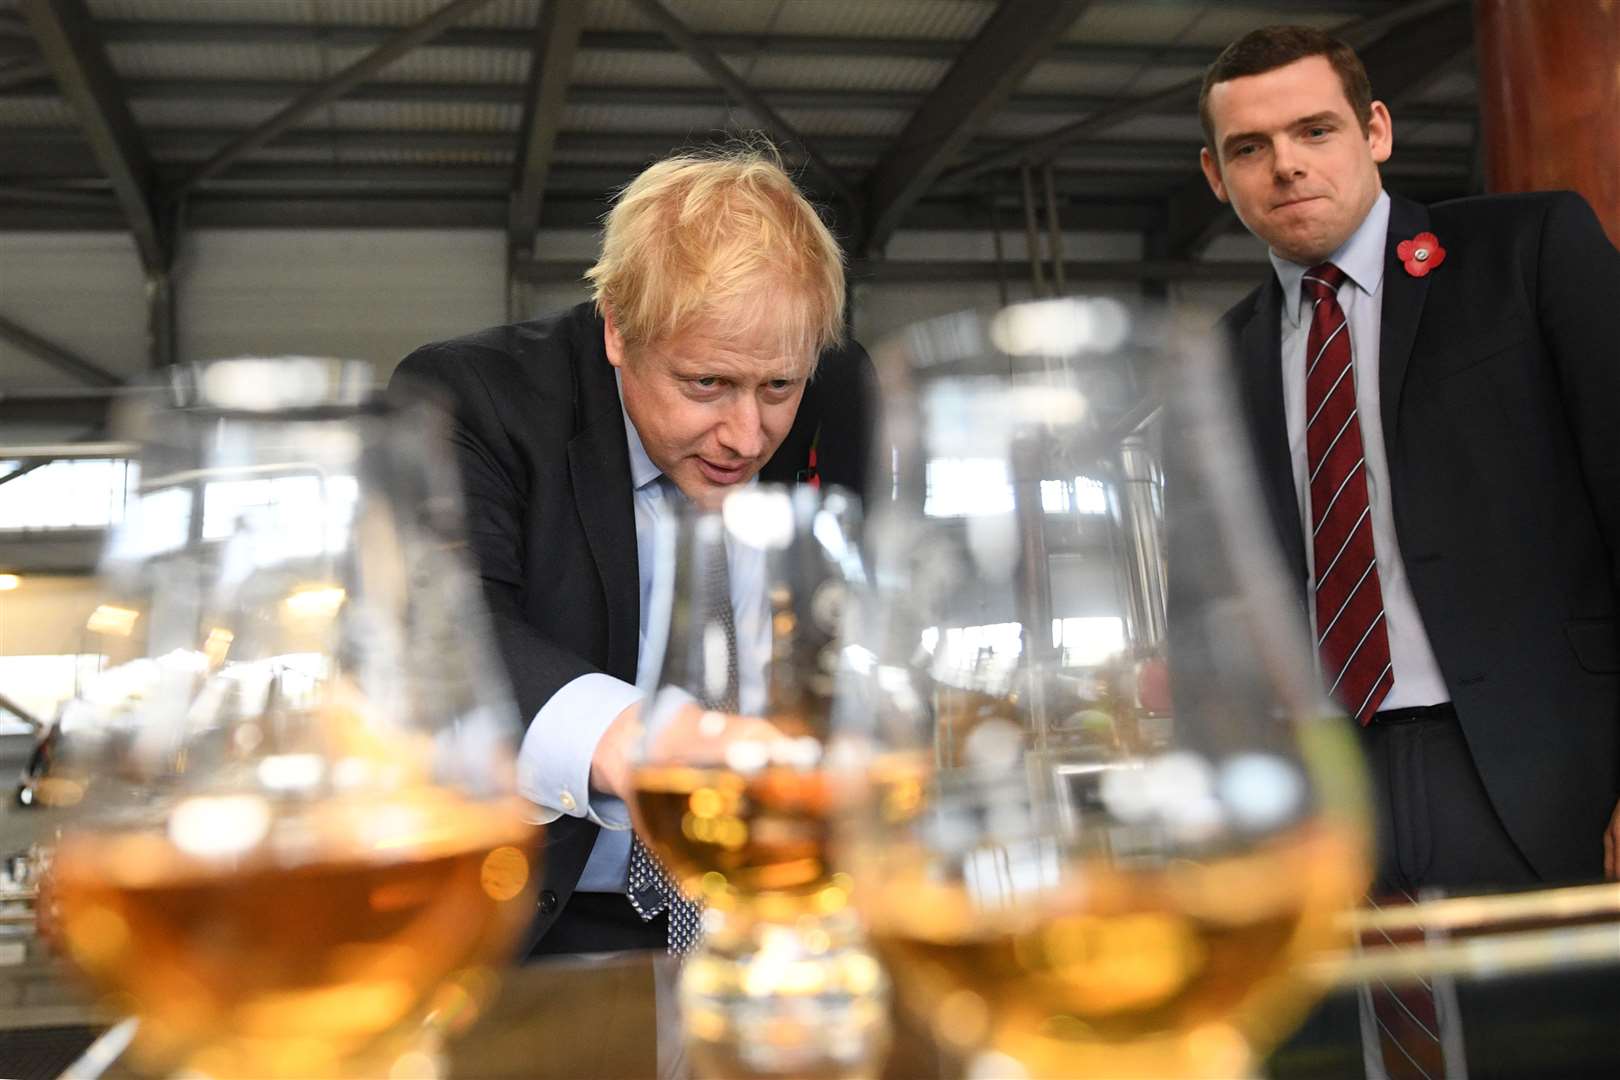 Prime Minister Boris Johnson tastes whisky at the Roseisle Distillery in Scotland near Moray with Douglas Ross MP (right), at the start of the General Election campaign.